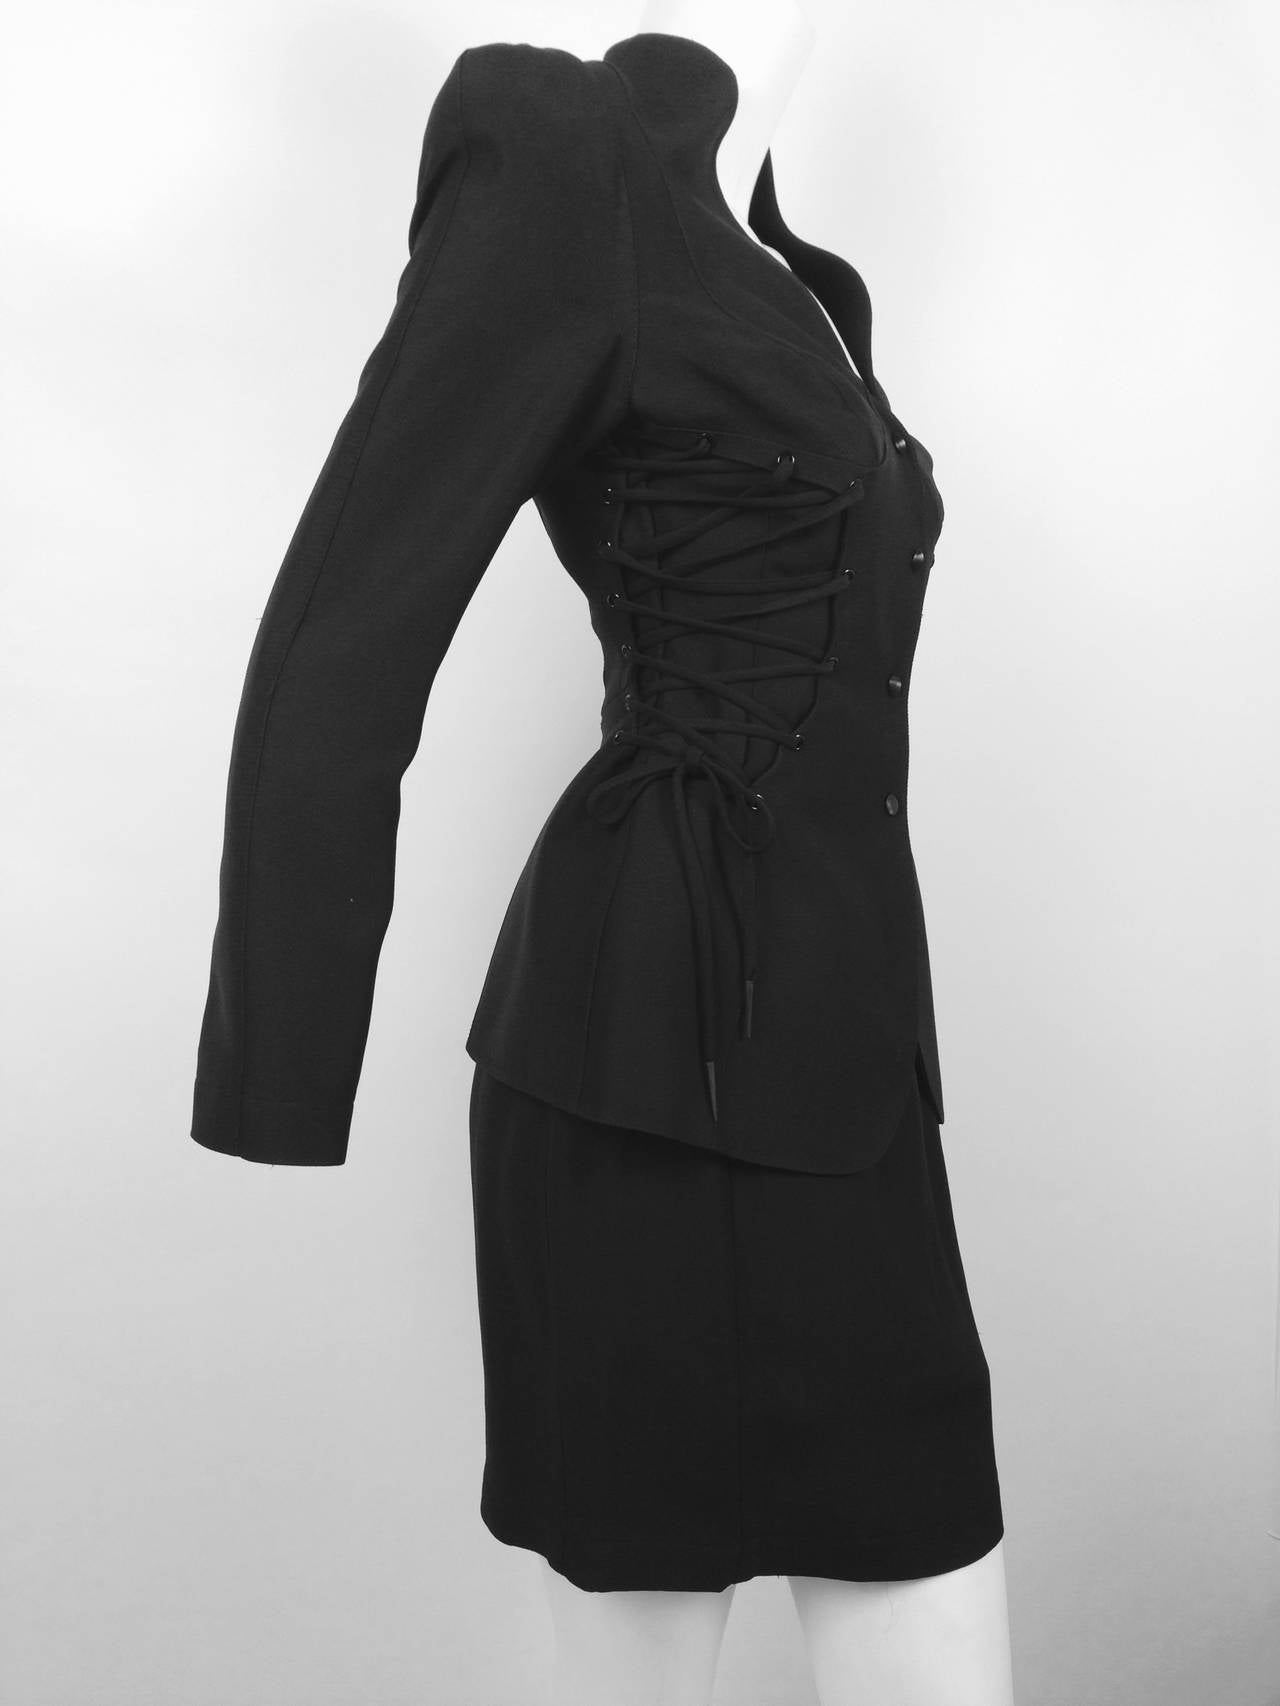 Vintage Thierry Mugler Black Suit With Corseted Jacket In Excellent Condition For Sale In Palm Beach, FL